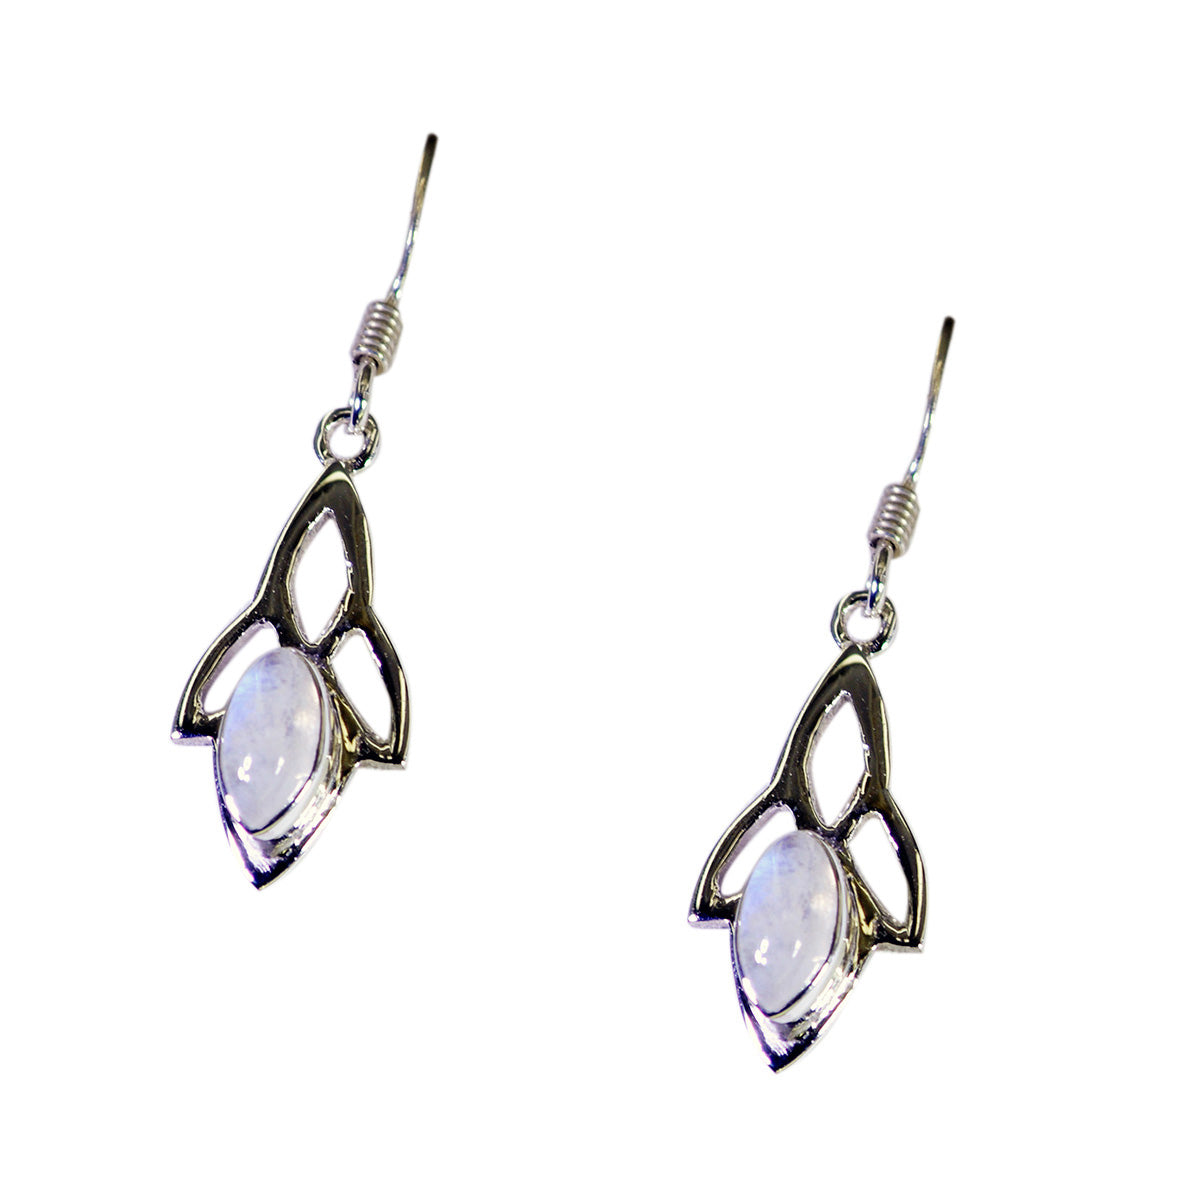 Riyo Genuine Gems marquise Cabochon White Rainbow Moonstone Silver Earrings gift for mothers day